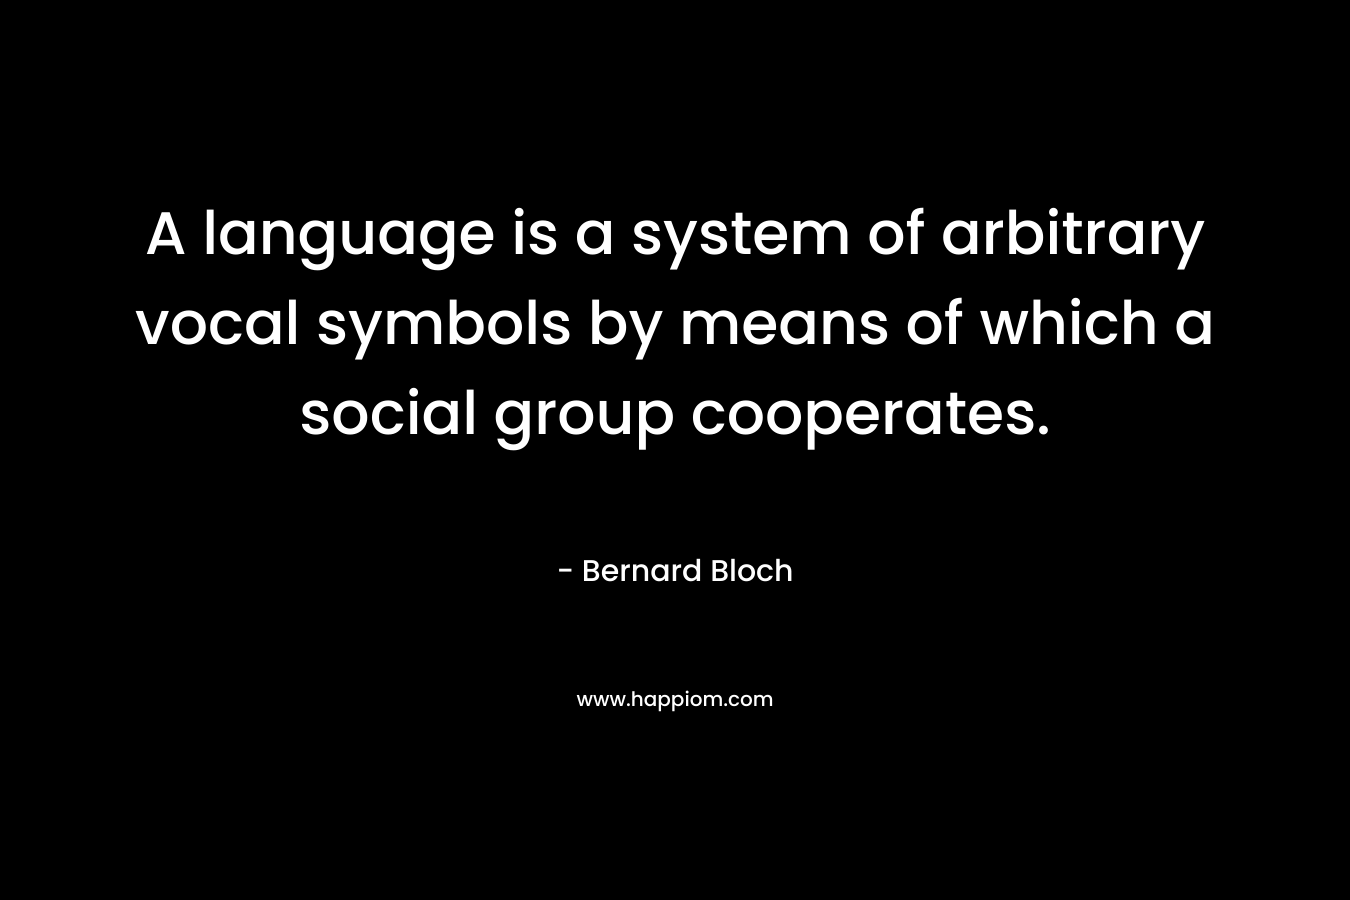 A language is a system of arbitrary vocal symbols by means of which a social group cooperates.